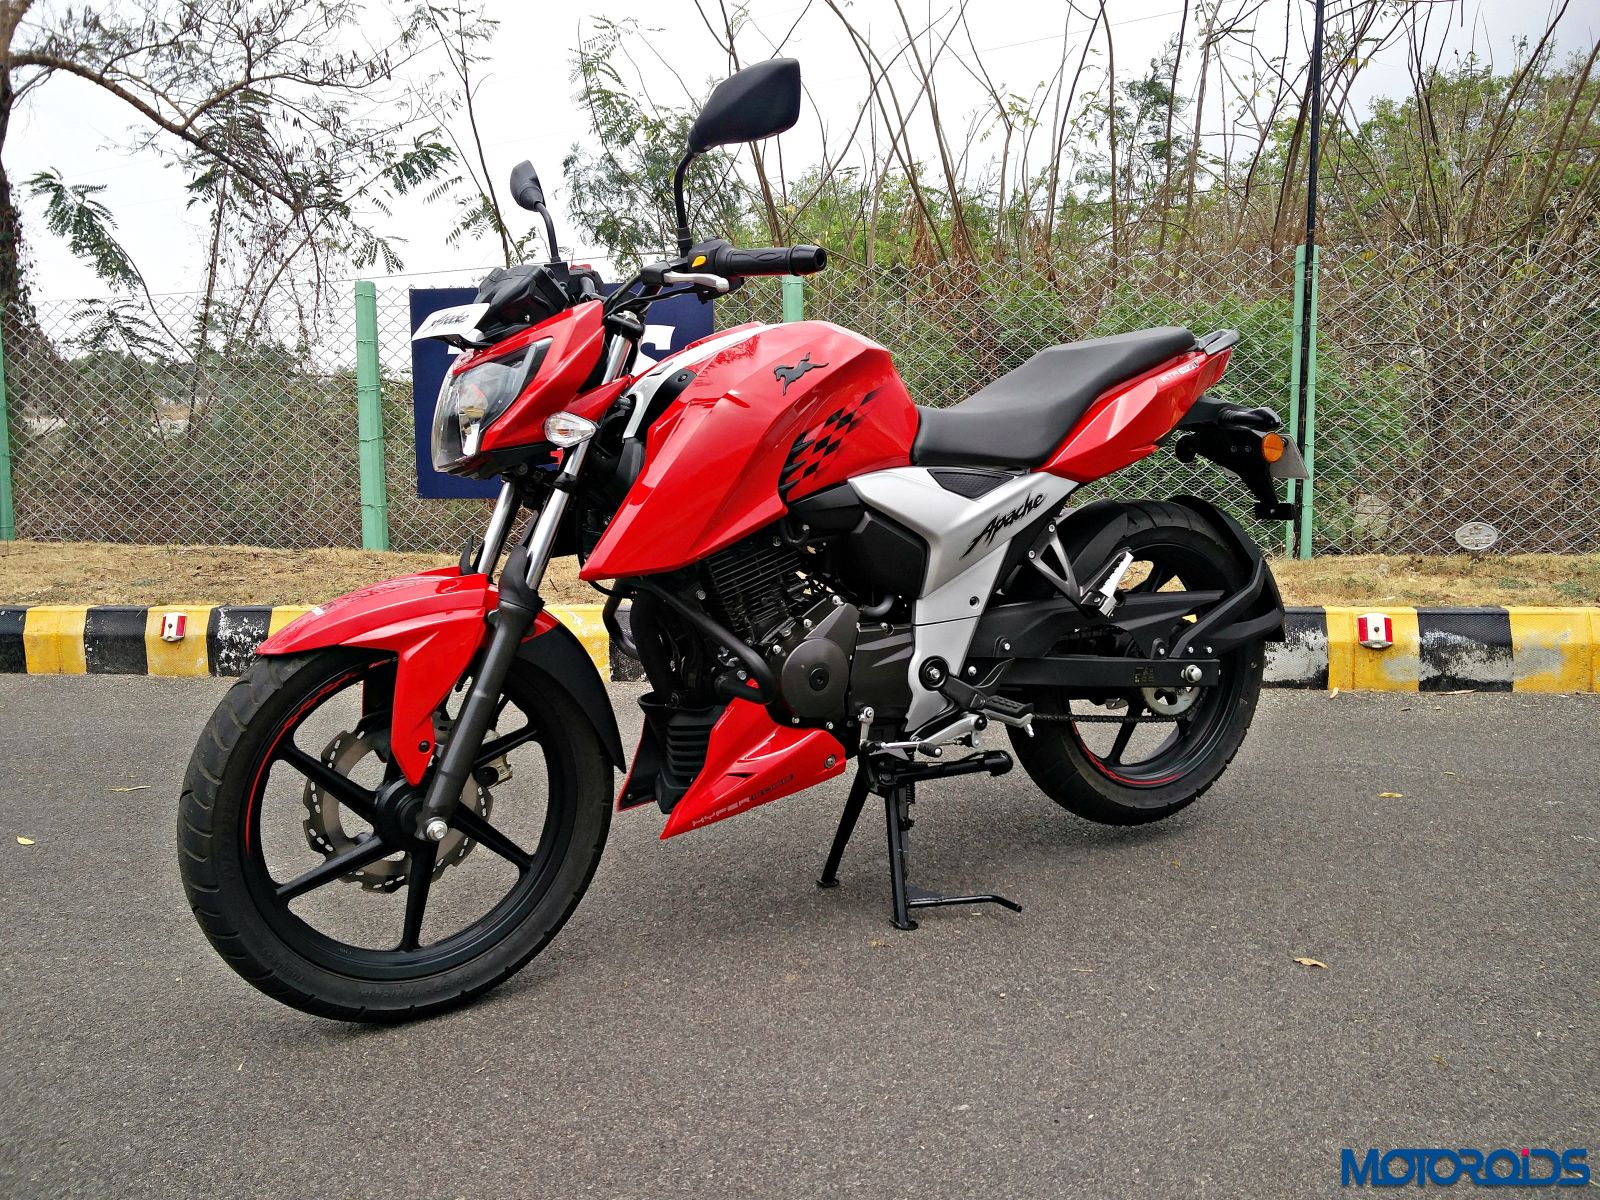 After Conquering India Where Is The Tvs Apache Rtr 160 4v Headed